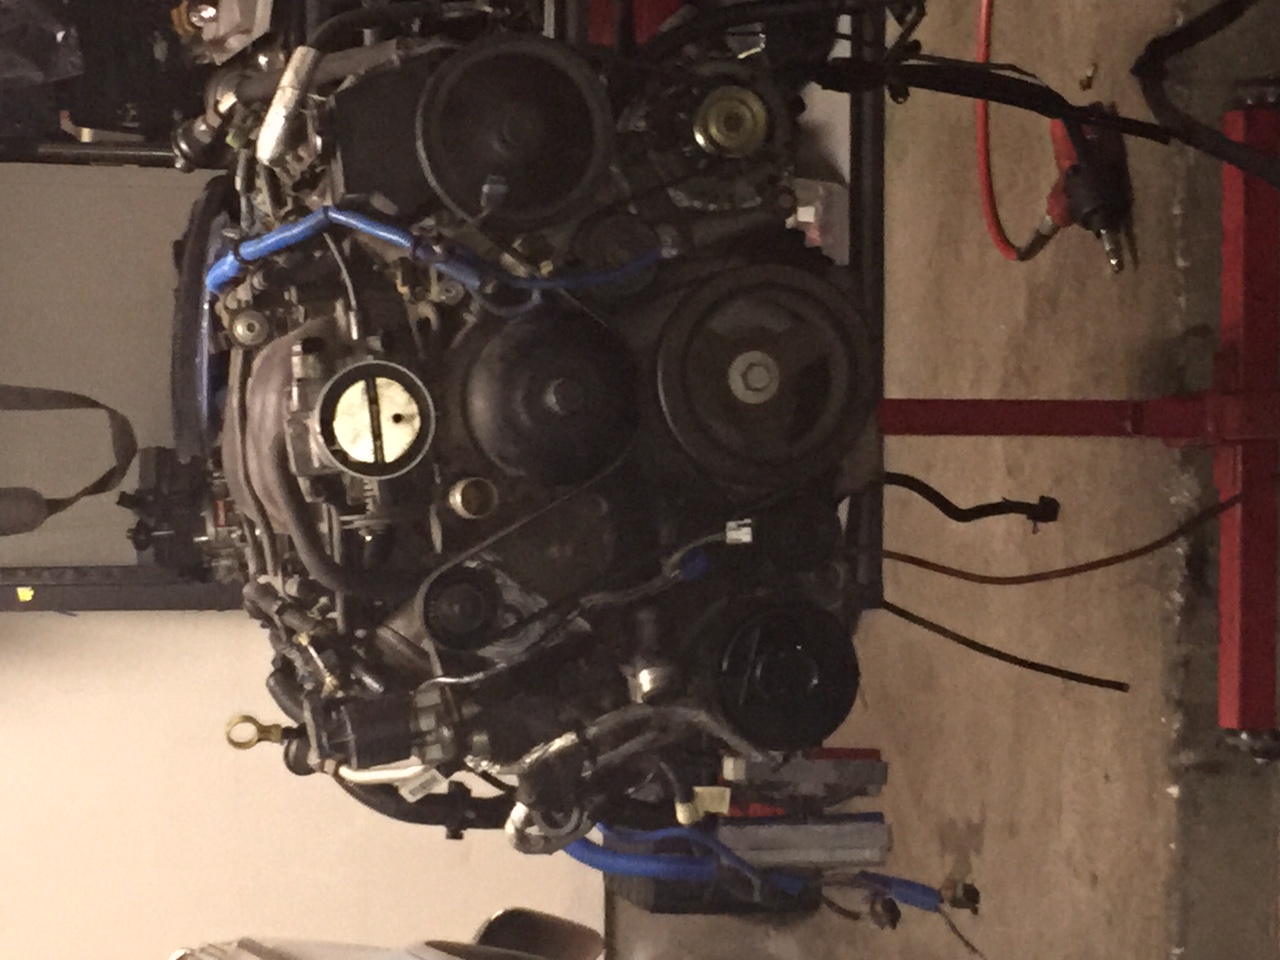 1999 LS1 Engine for sale!! - LS1TECH - Camaro and Firebird Forum Discussion